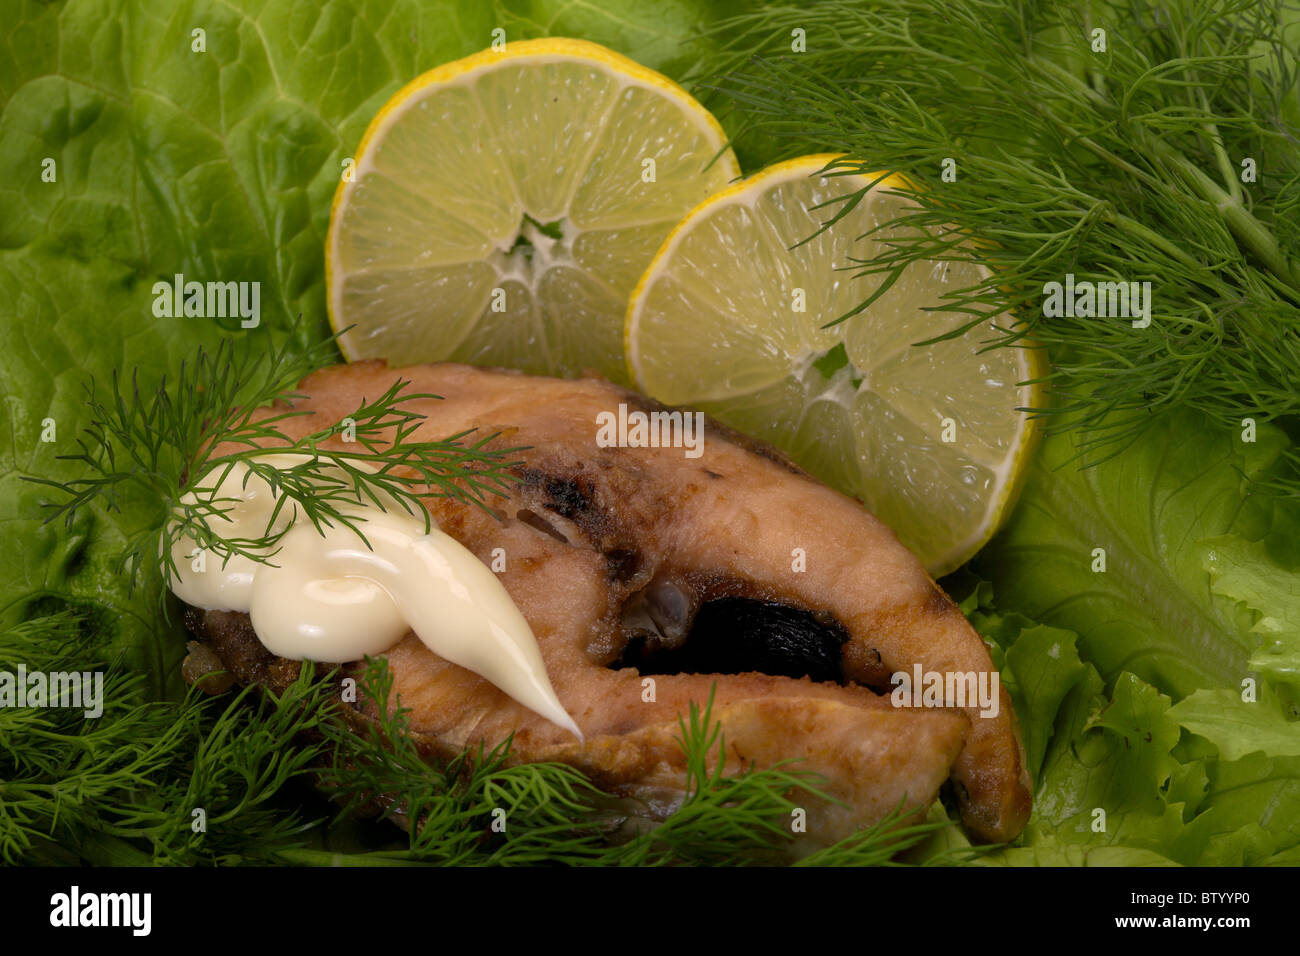 Portion of a fried fish. Served by fennel and leaves of salad. Stock Photo